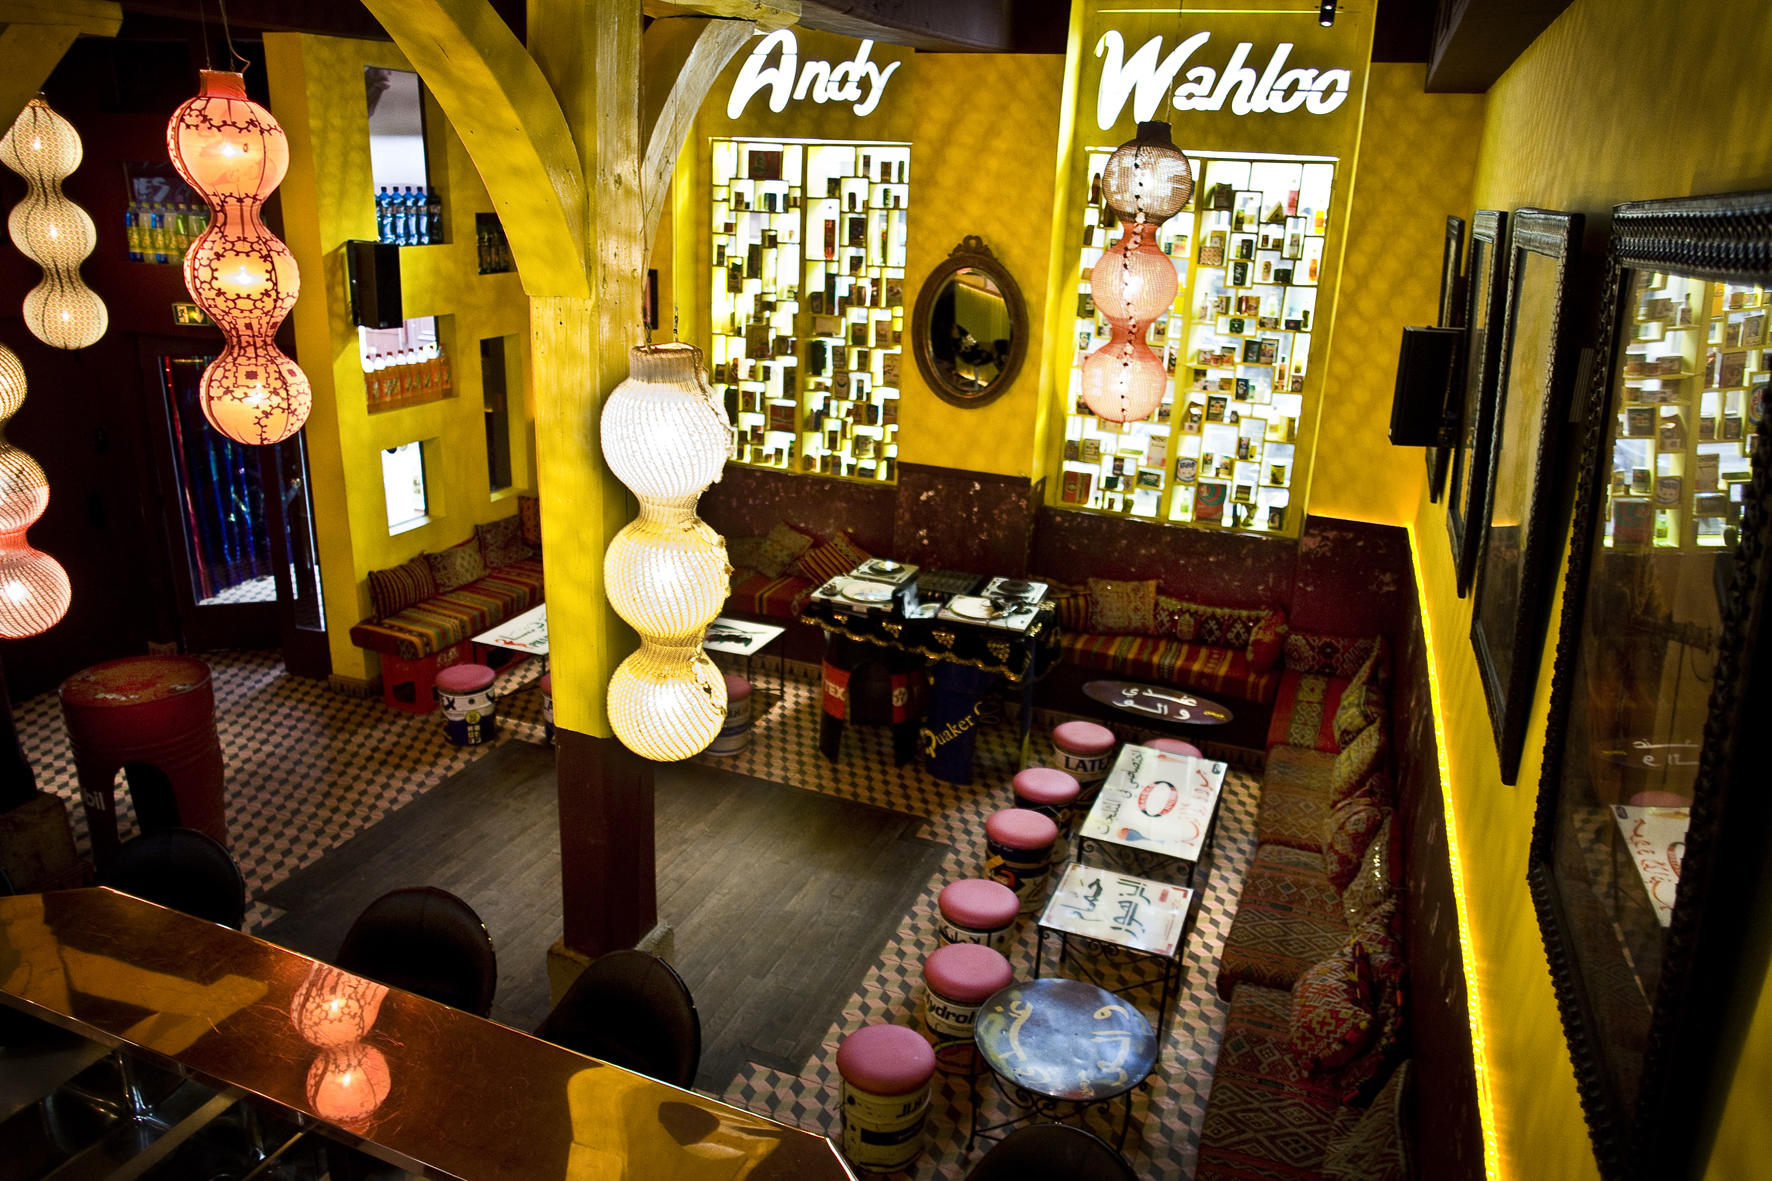 Andy Wahloo, Paris - Get Andy Wahloo Restaurant Reviews on Times of India  Travel